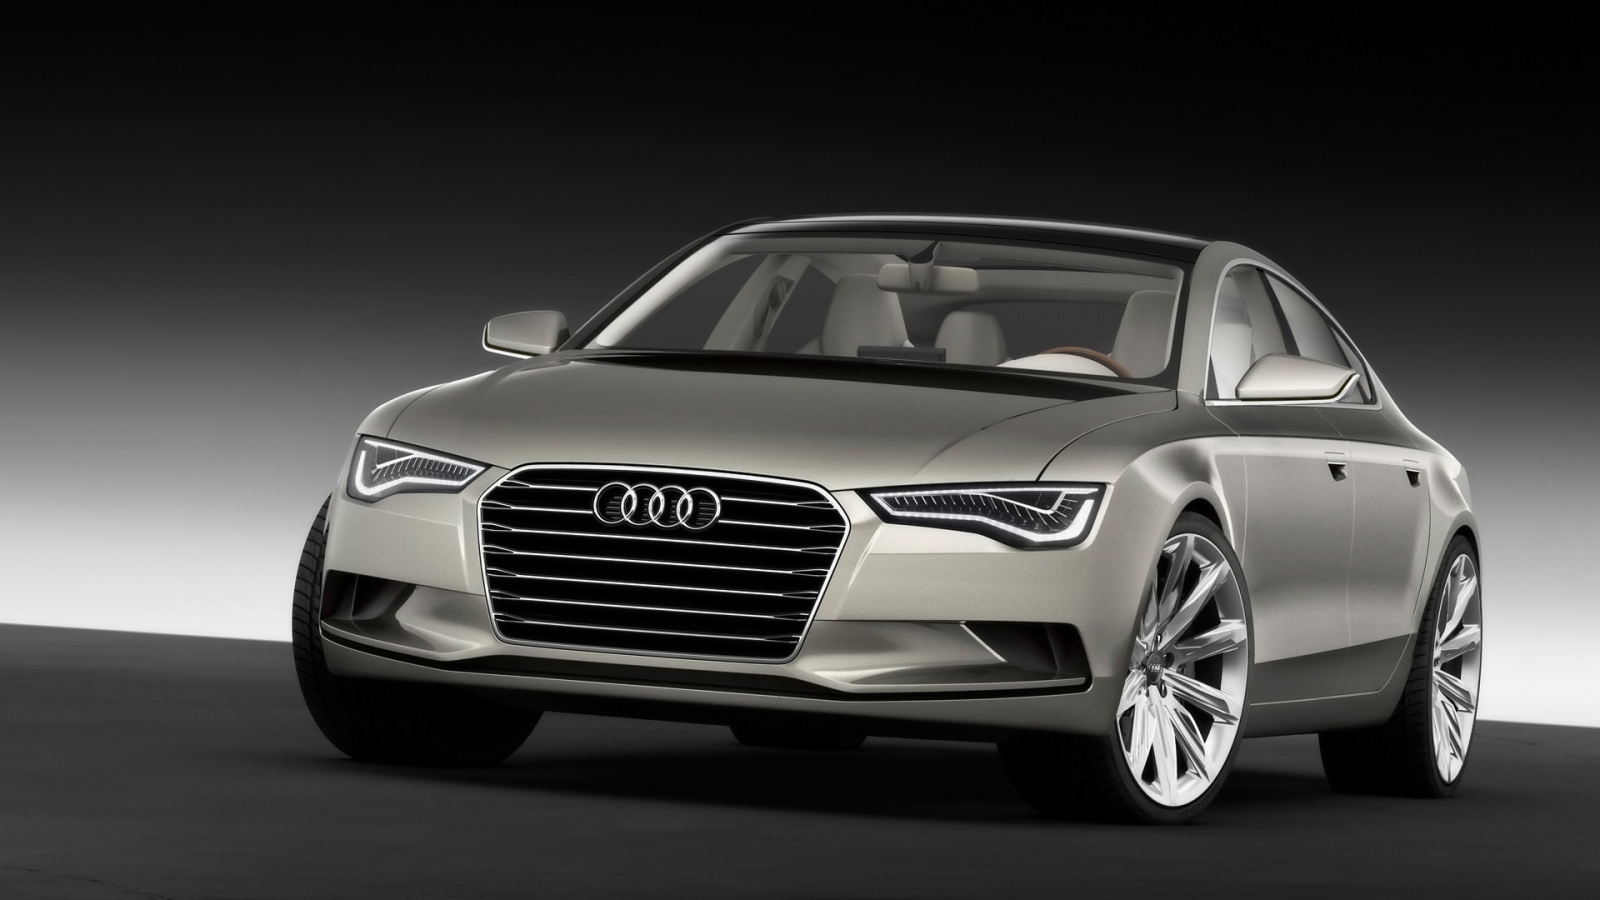 2009 Audi Sportback Concept - Front Angle for 1600 x 900 HDTV resolution